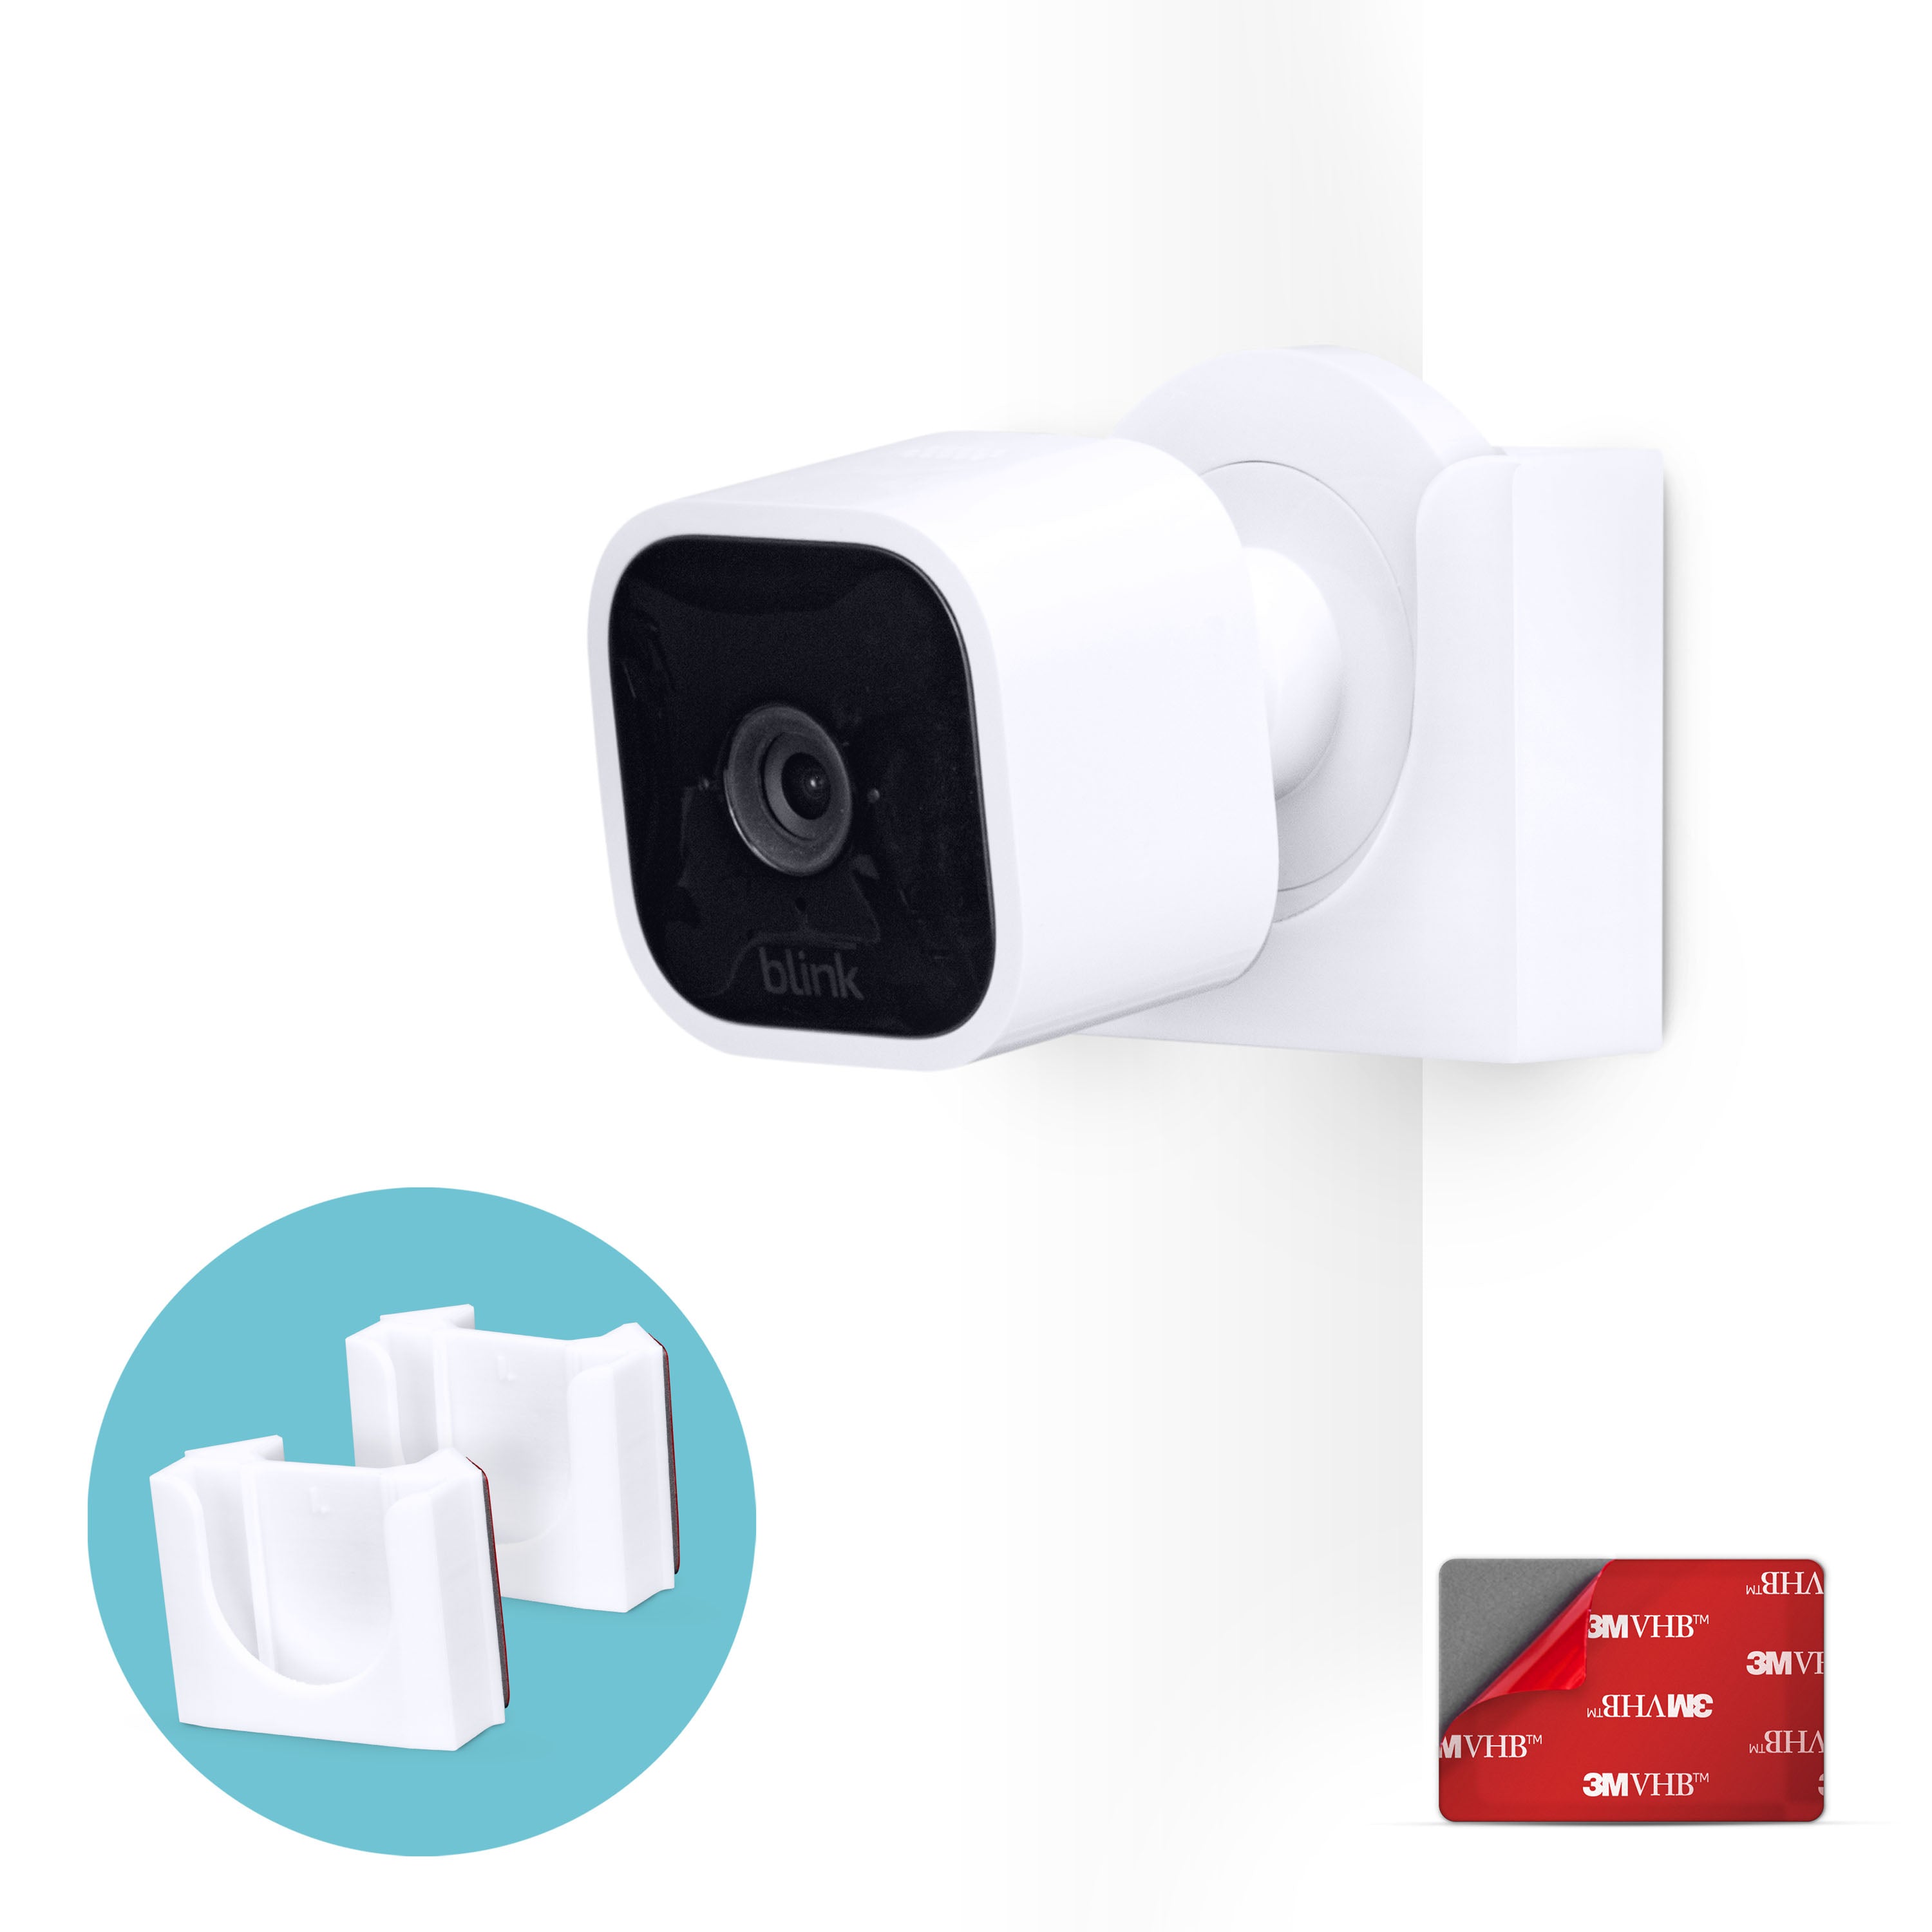 Blink Outdoor + Indoor review: Compact security cameras that just keep going